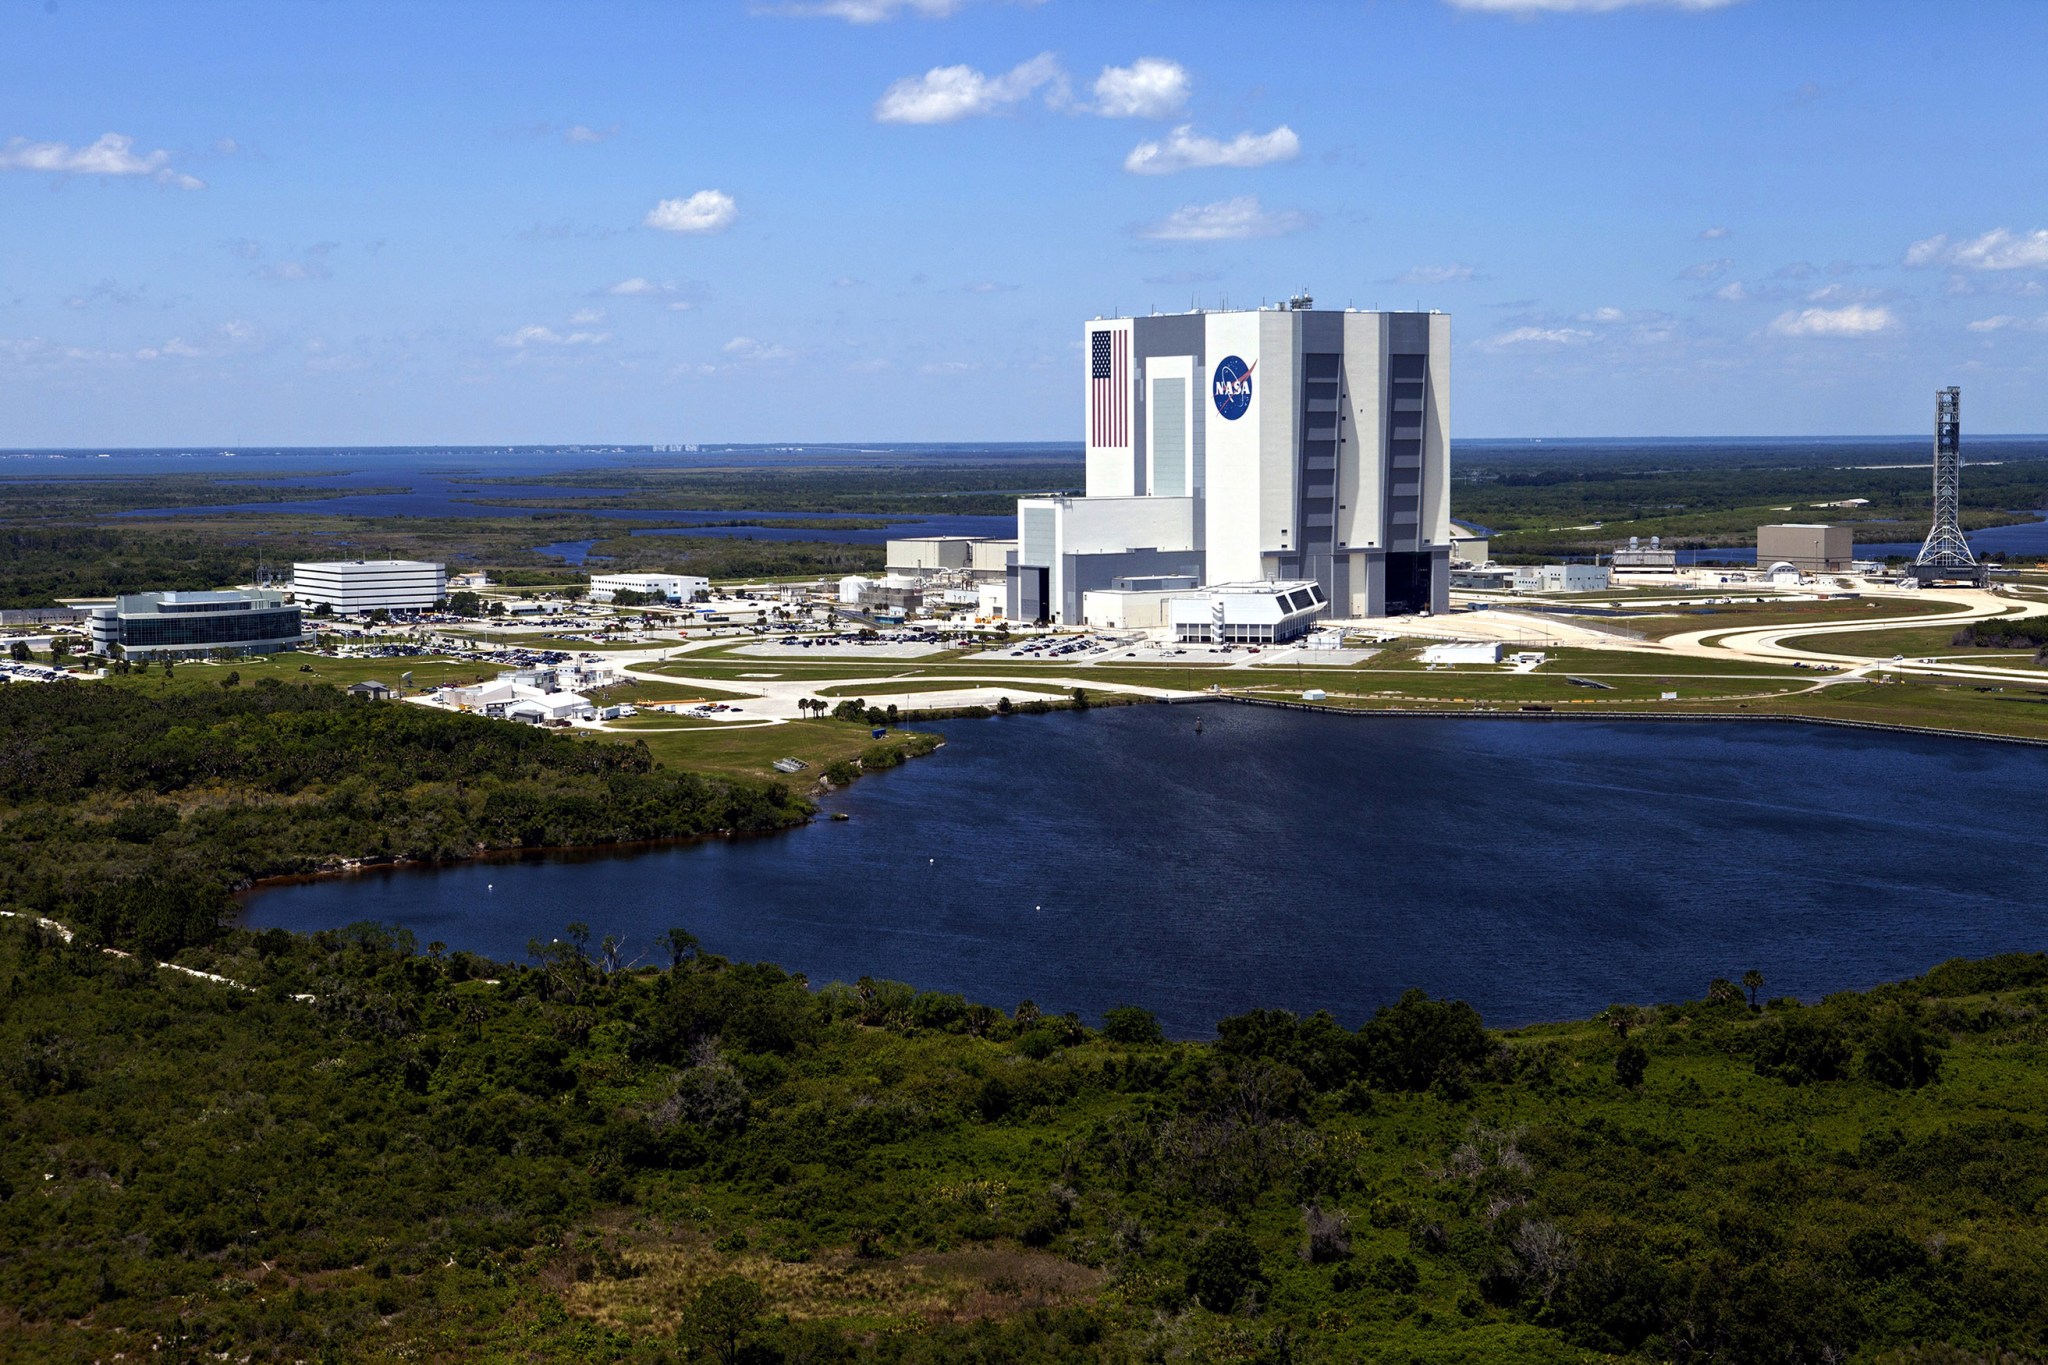 Kennedy Space Center's Launch Complex 39 facilities including the Vehicle Assembly Building at right